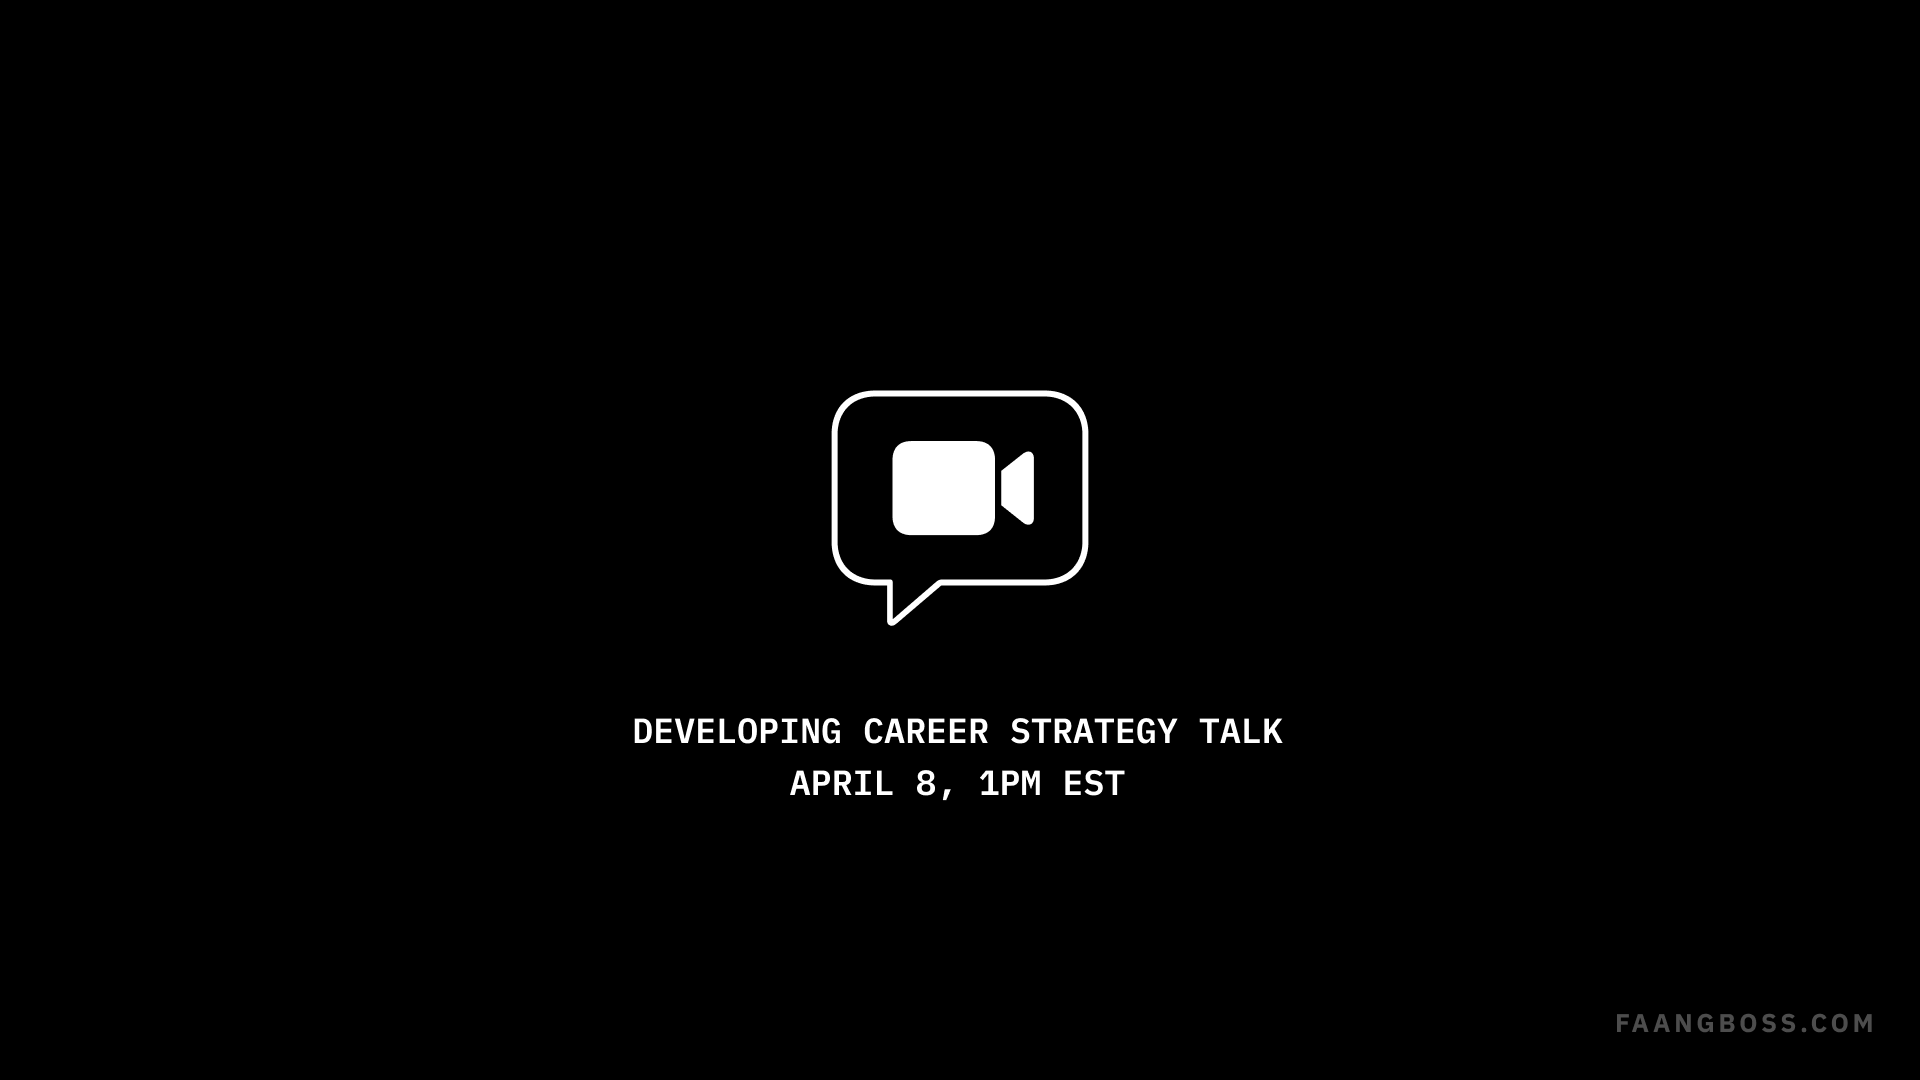 Tune into "Developing a Career Strategy" talk on April 8, 1 pm